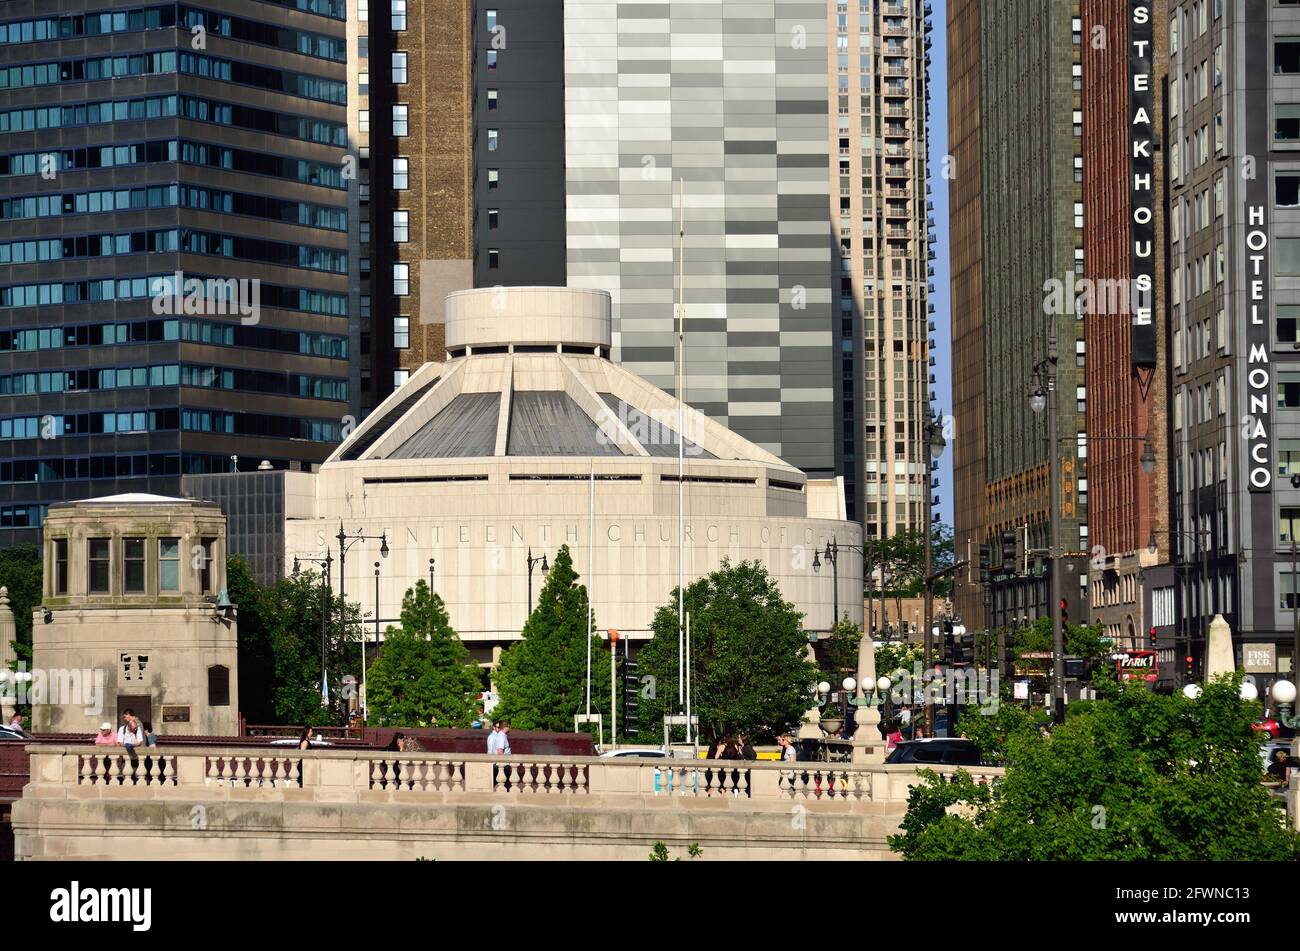 Chicago, Illinois, USA. The Seventeenth Church of Christ in downtown Chicago was built in 1968. Stock Photo